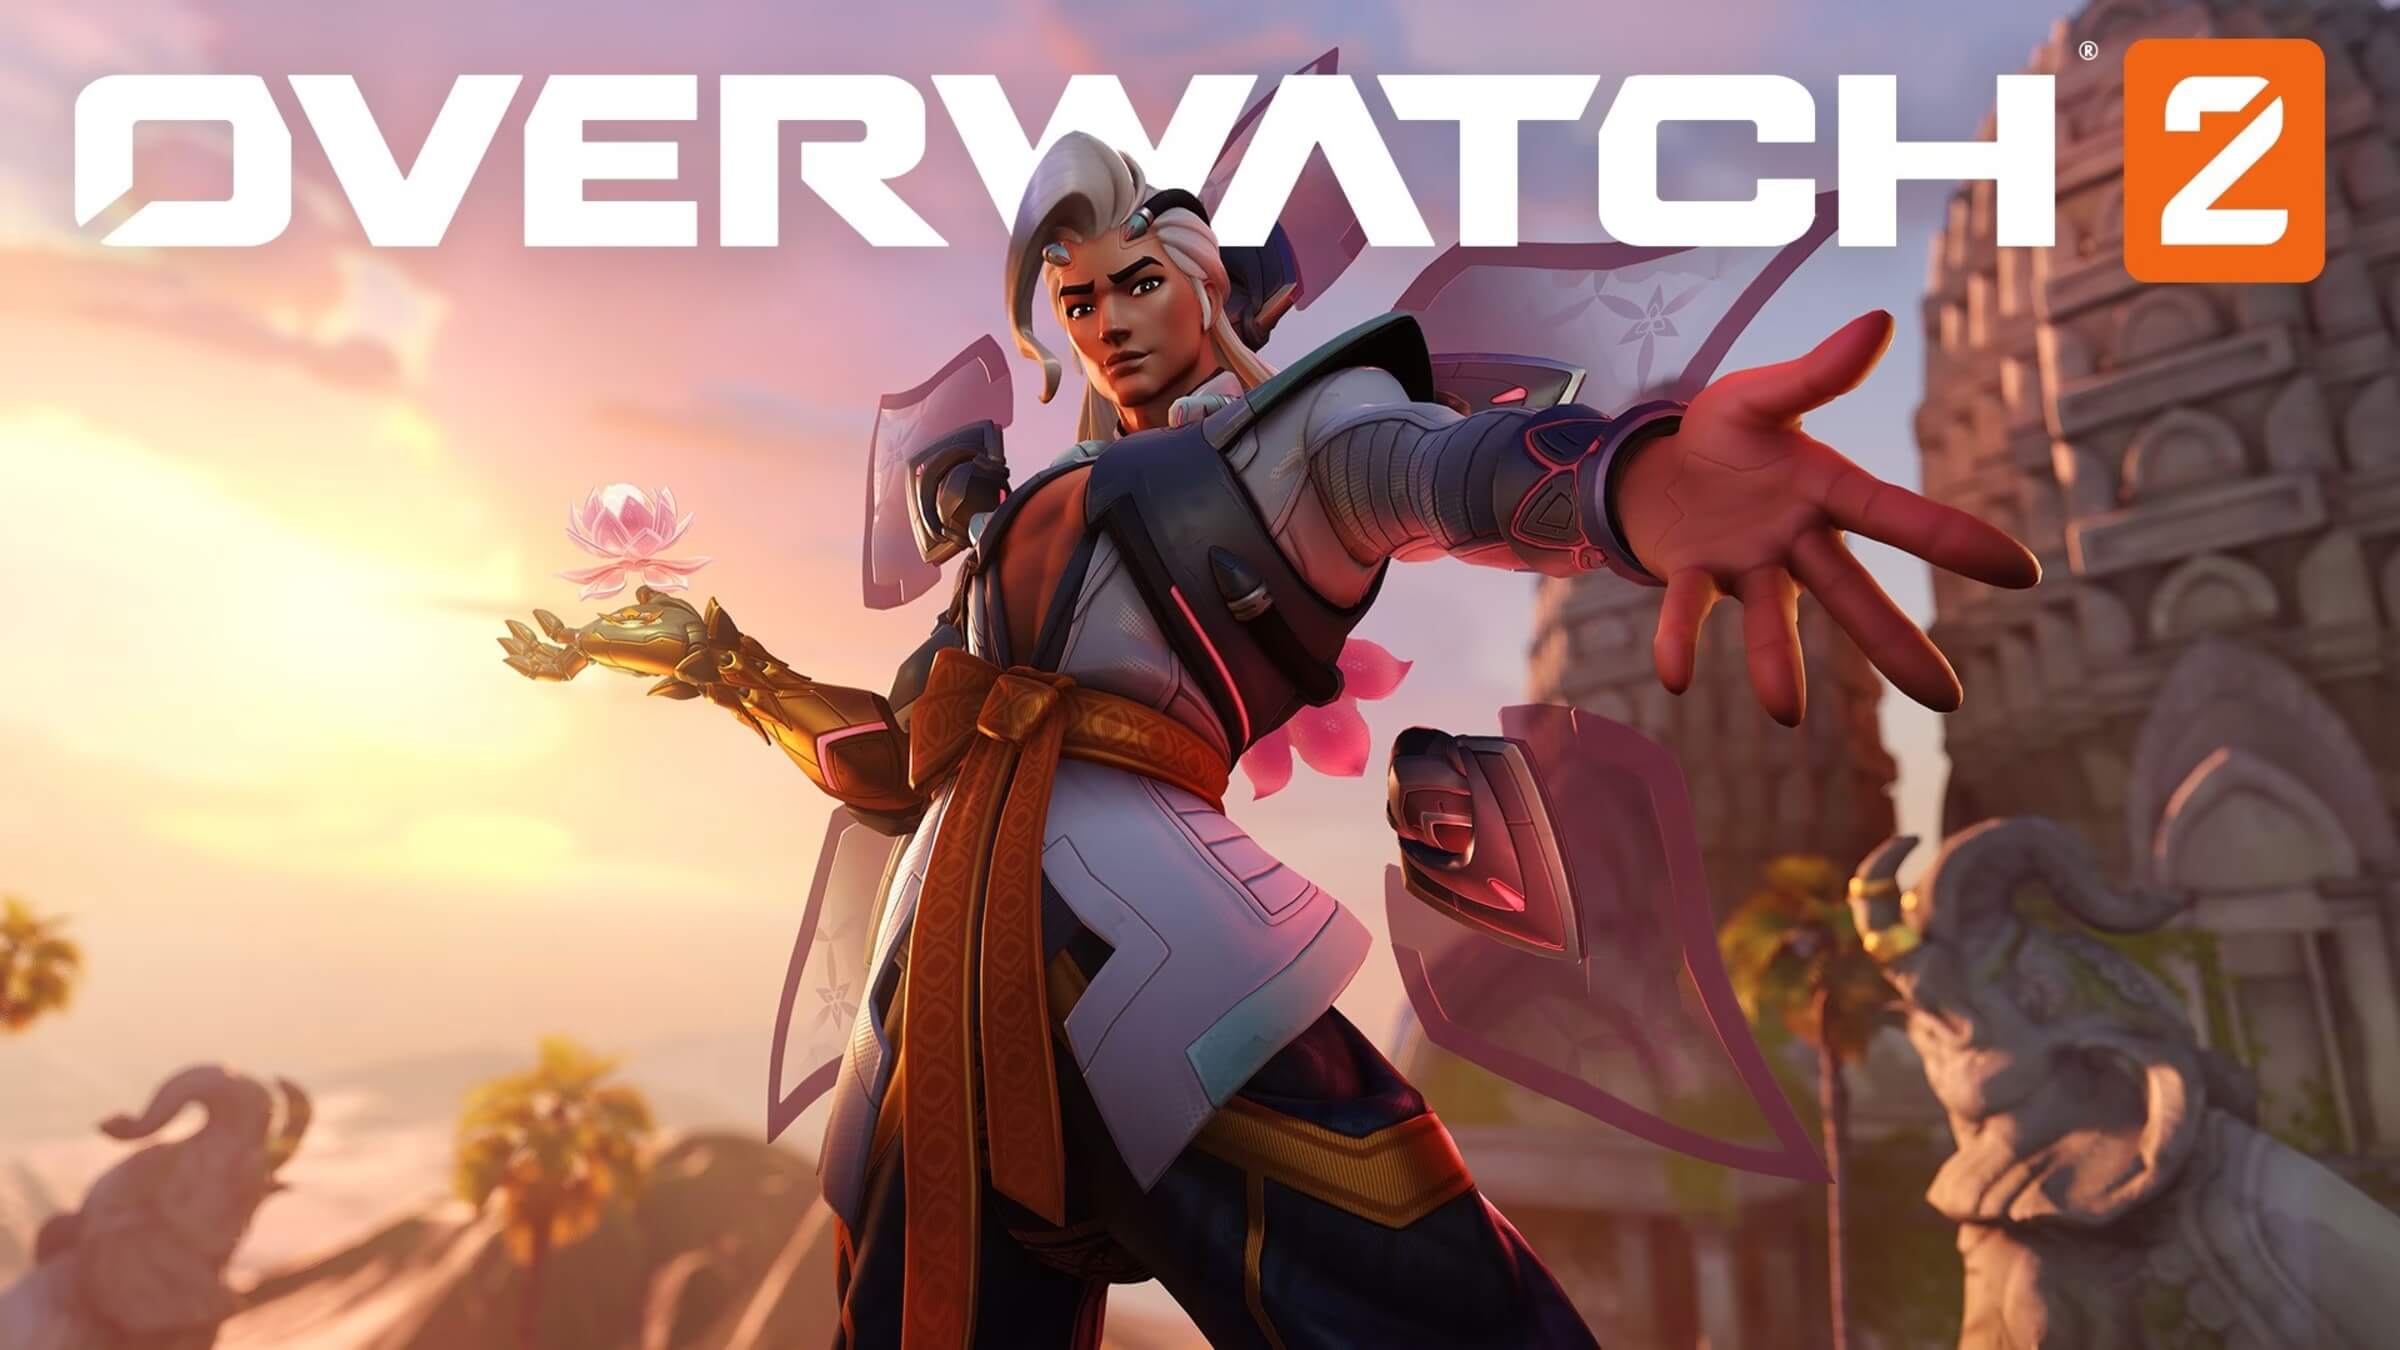 Prime Gaming gives Overwatch 2 players five levels of the new battle pass for free